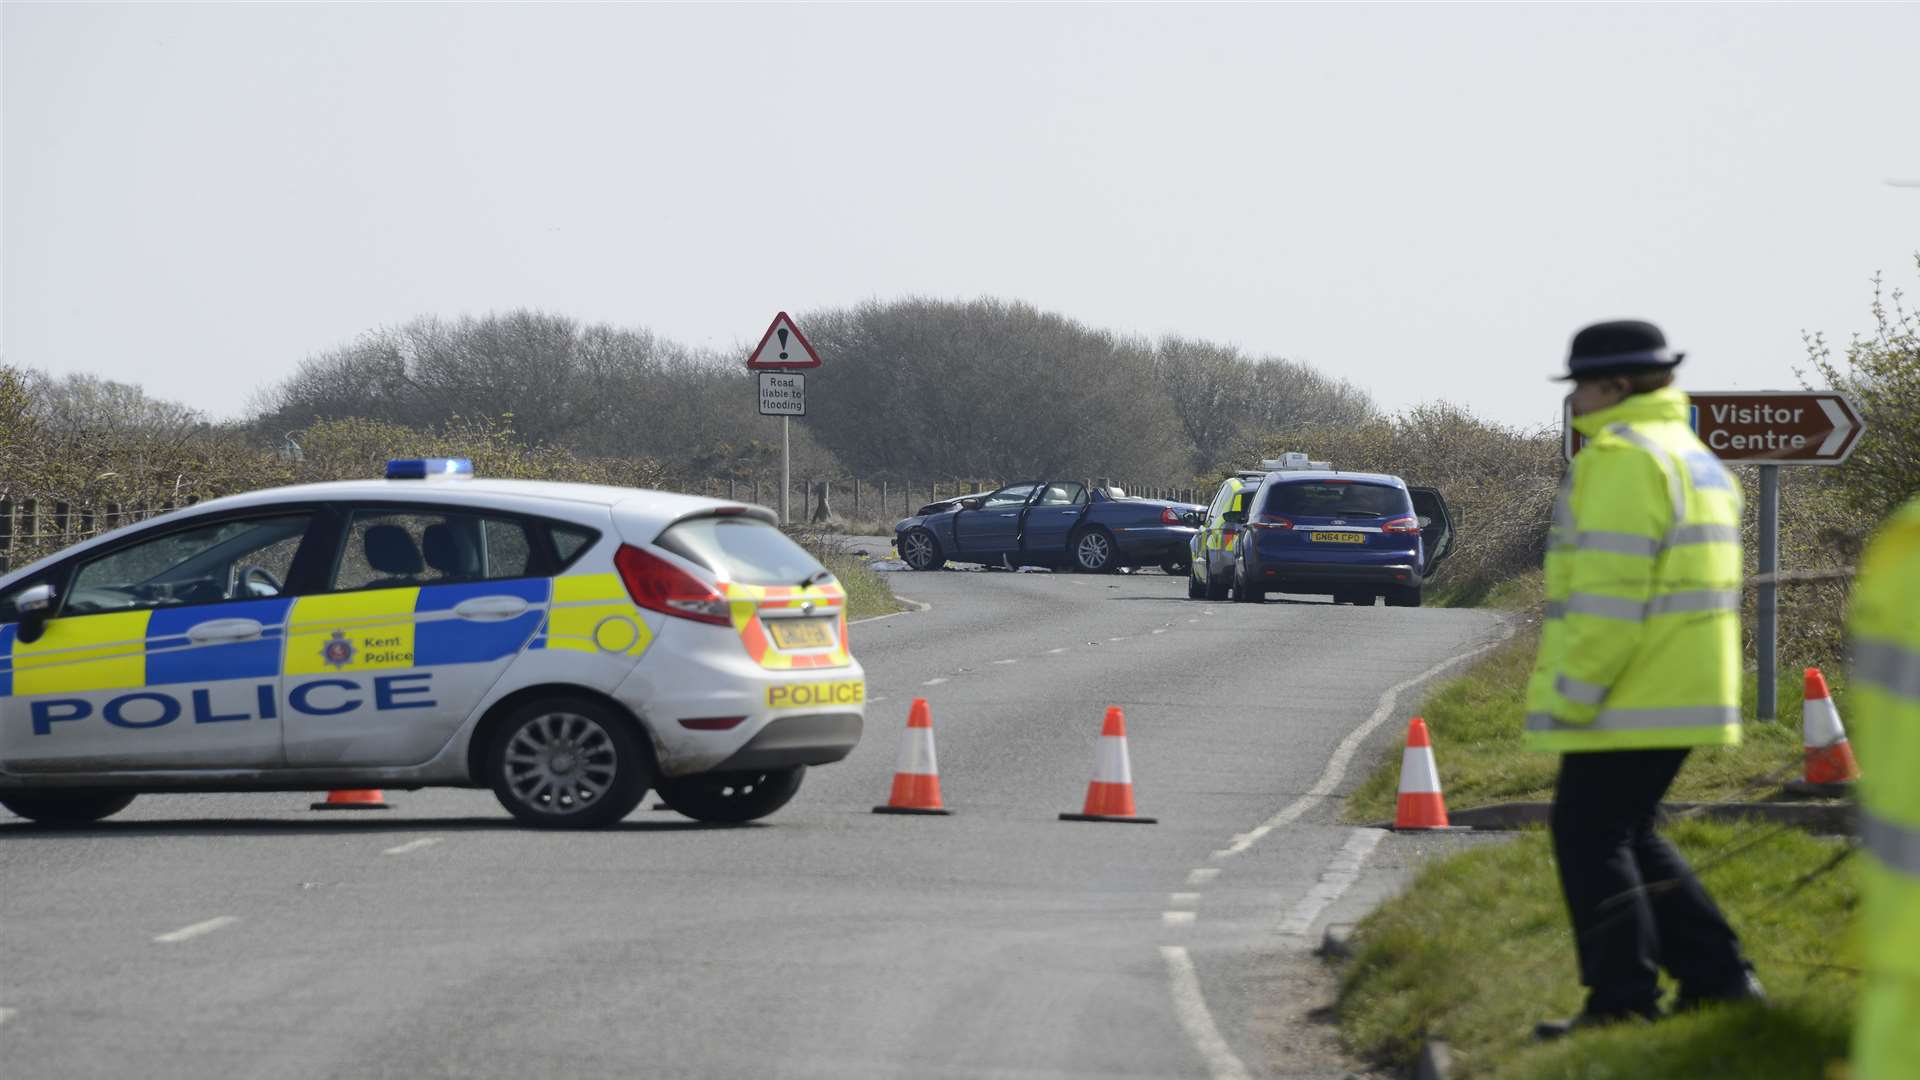 Police closed the road to carry out an investigation. Picture: Paul Amos